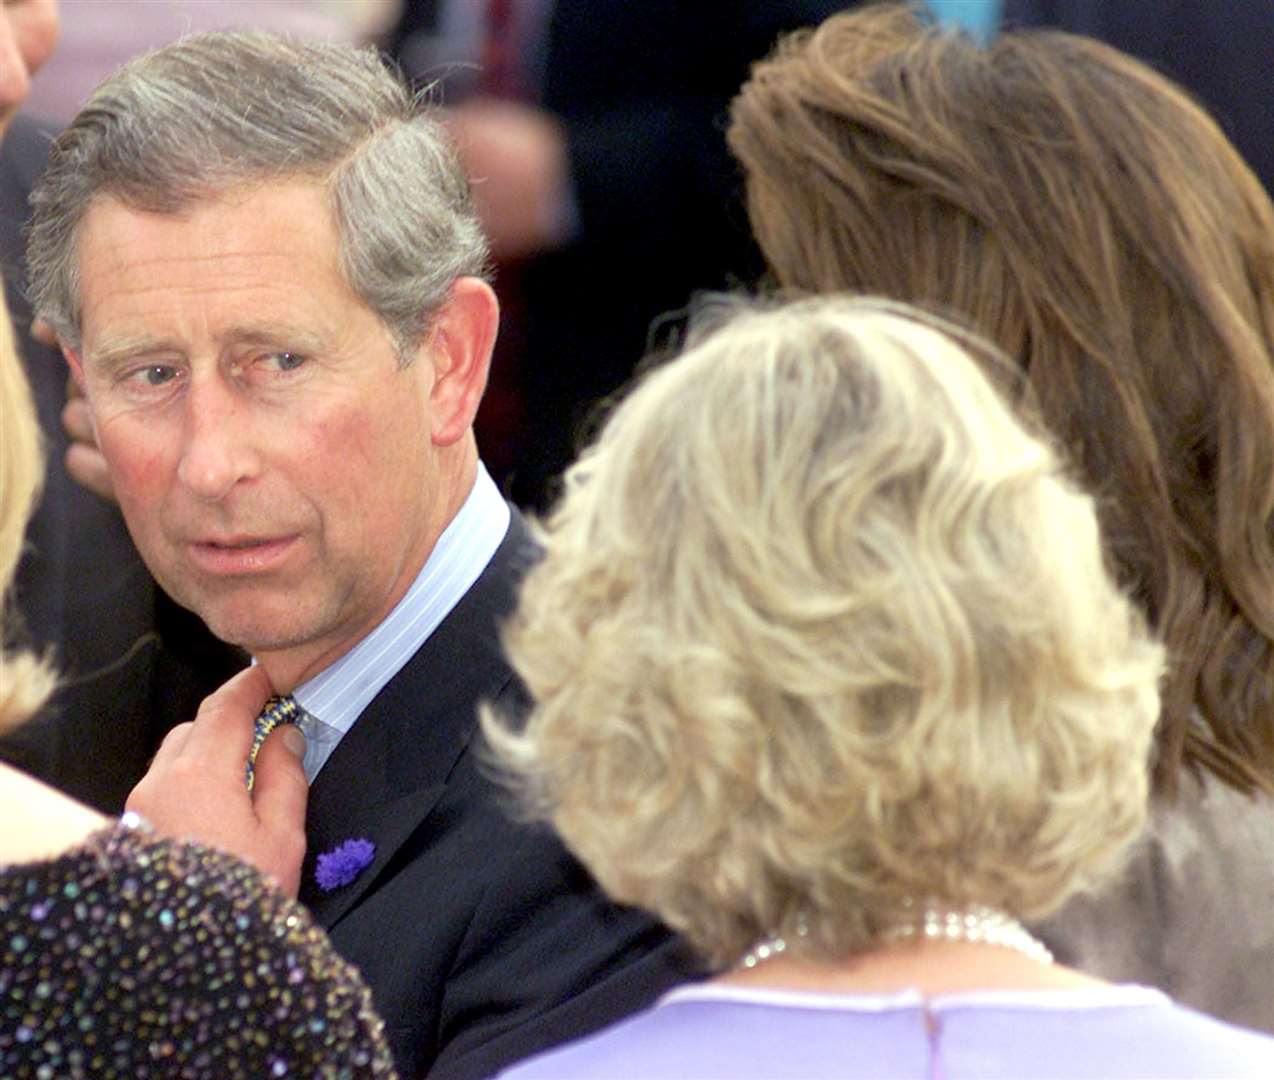 The then-Prince of Wales admitted to the affair with Camilla in 1994 (PA Archive/PA Images)